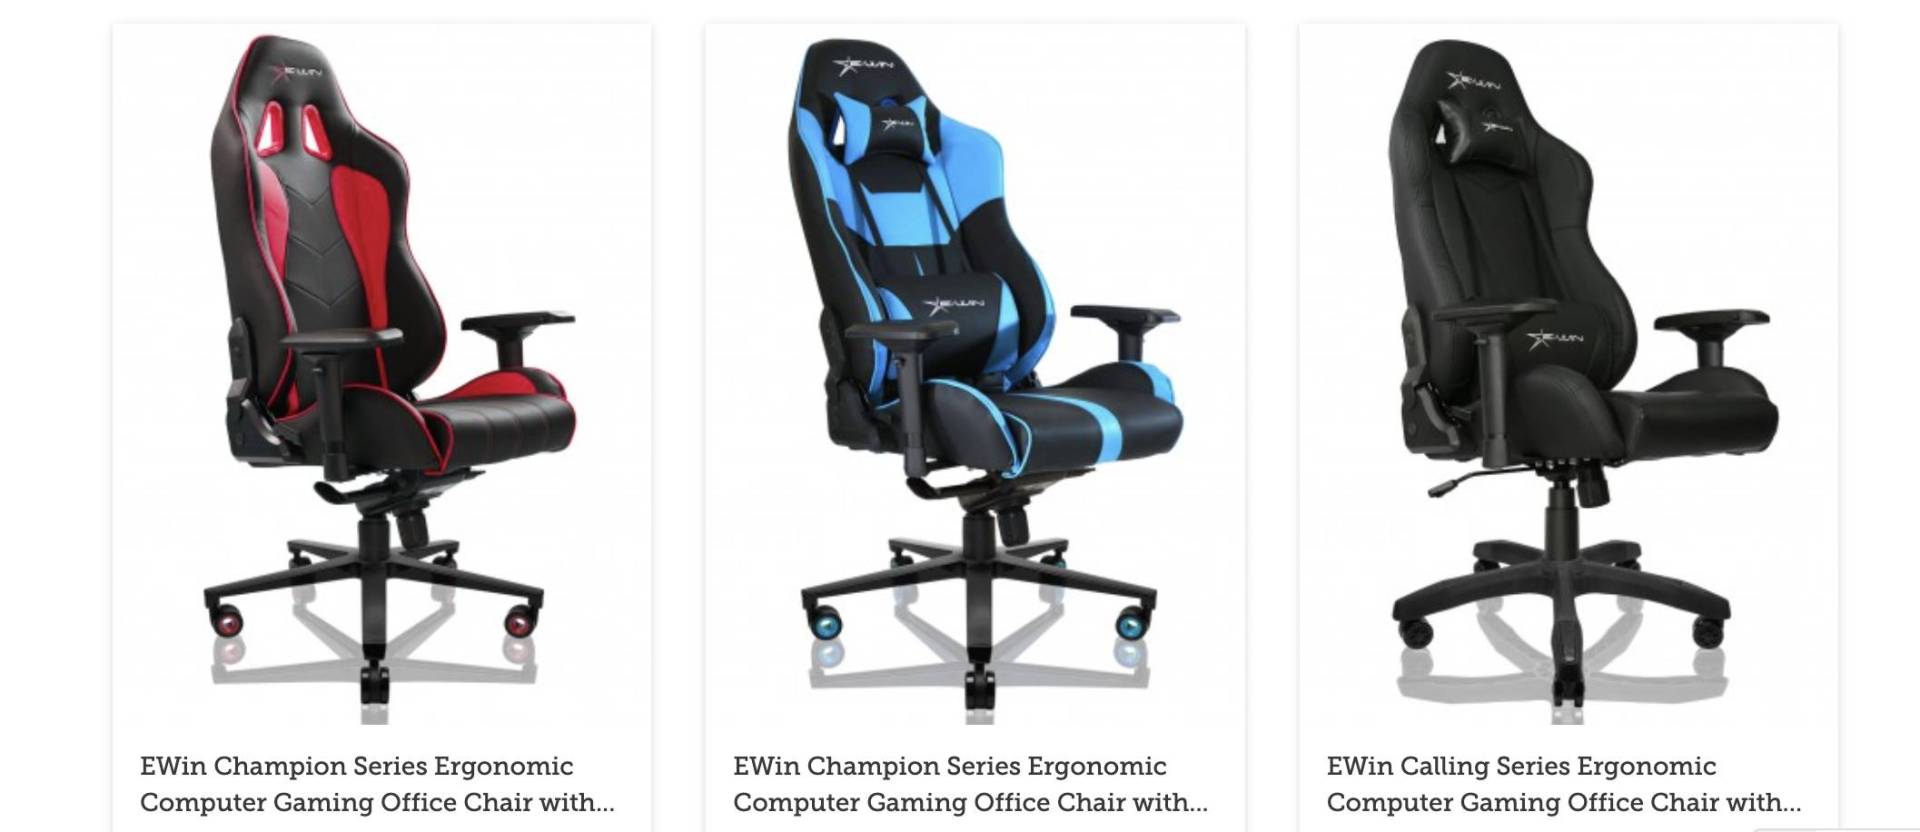 https://readwrite.com/wp-content/uploads/2022/08/E-Win-Chairs-the-Best.jpg